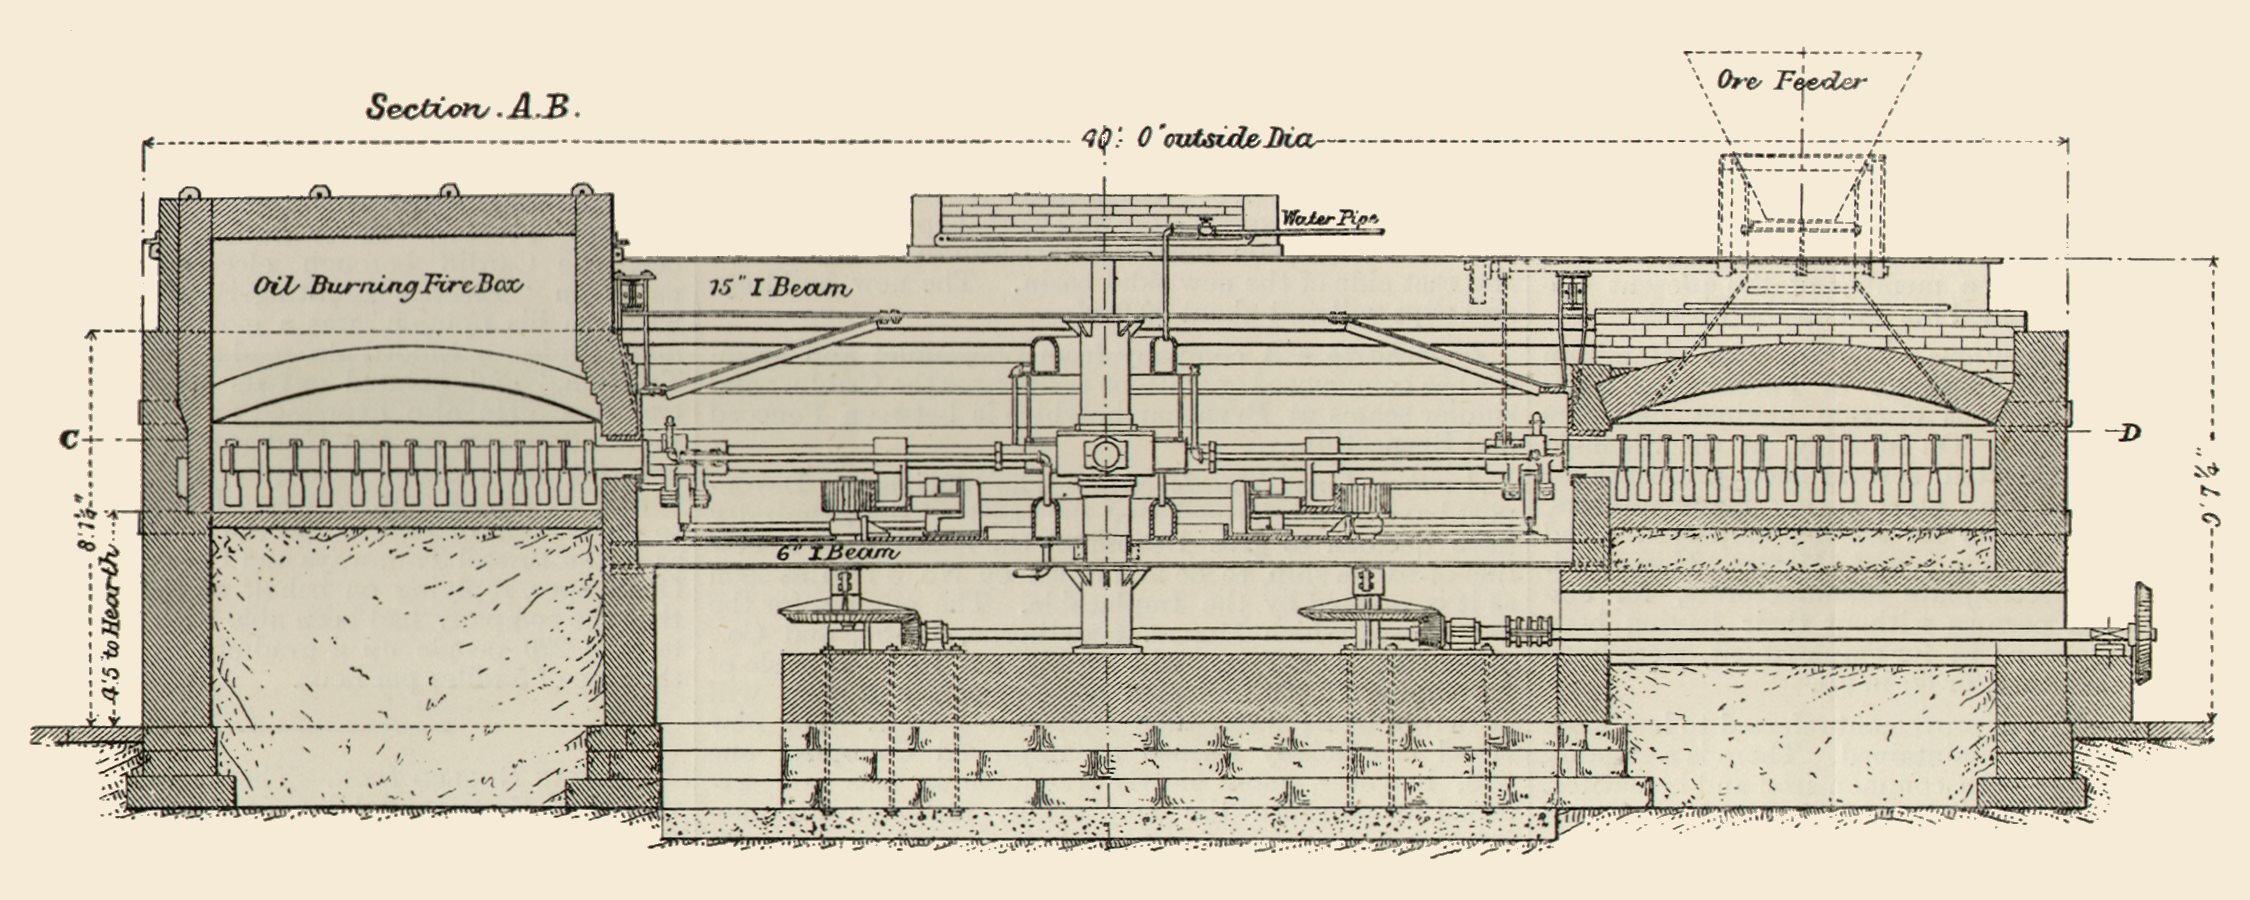 Section Vertical A-B of Furnace